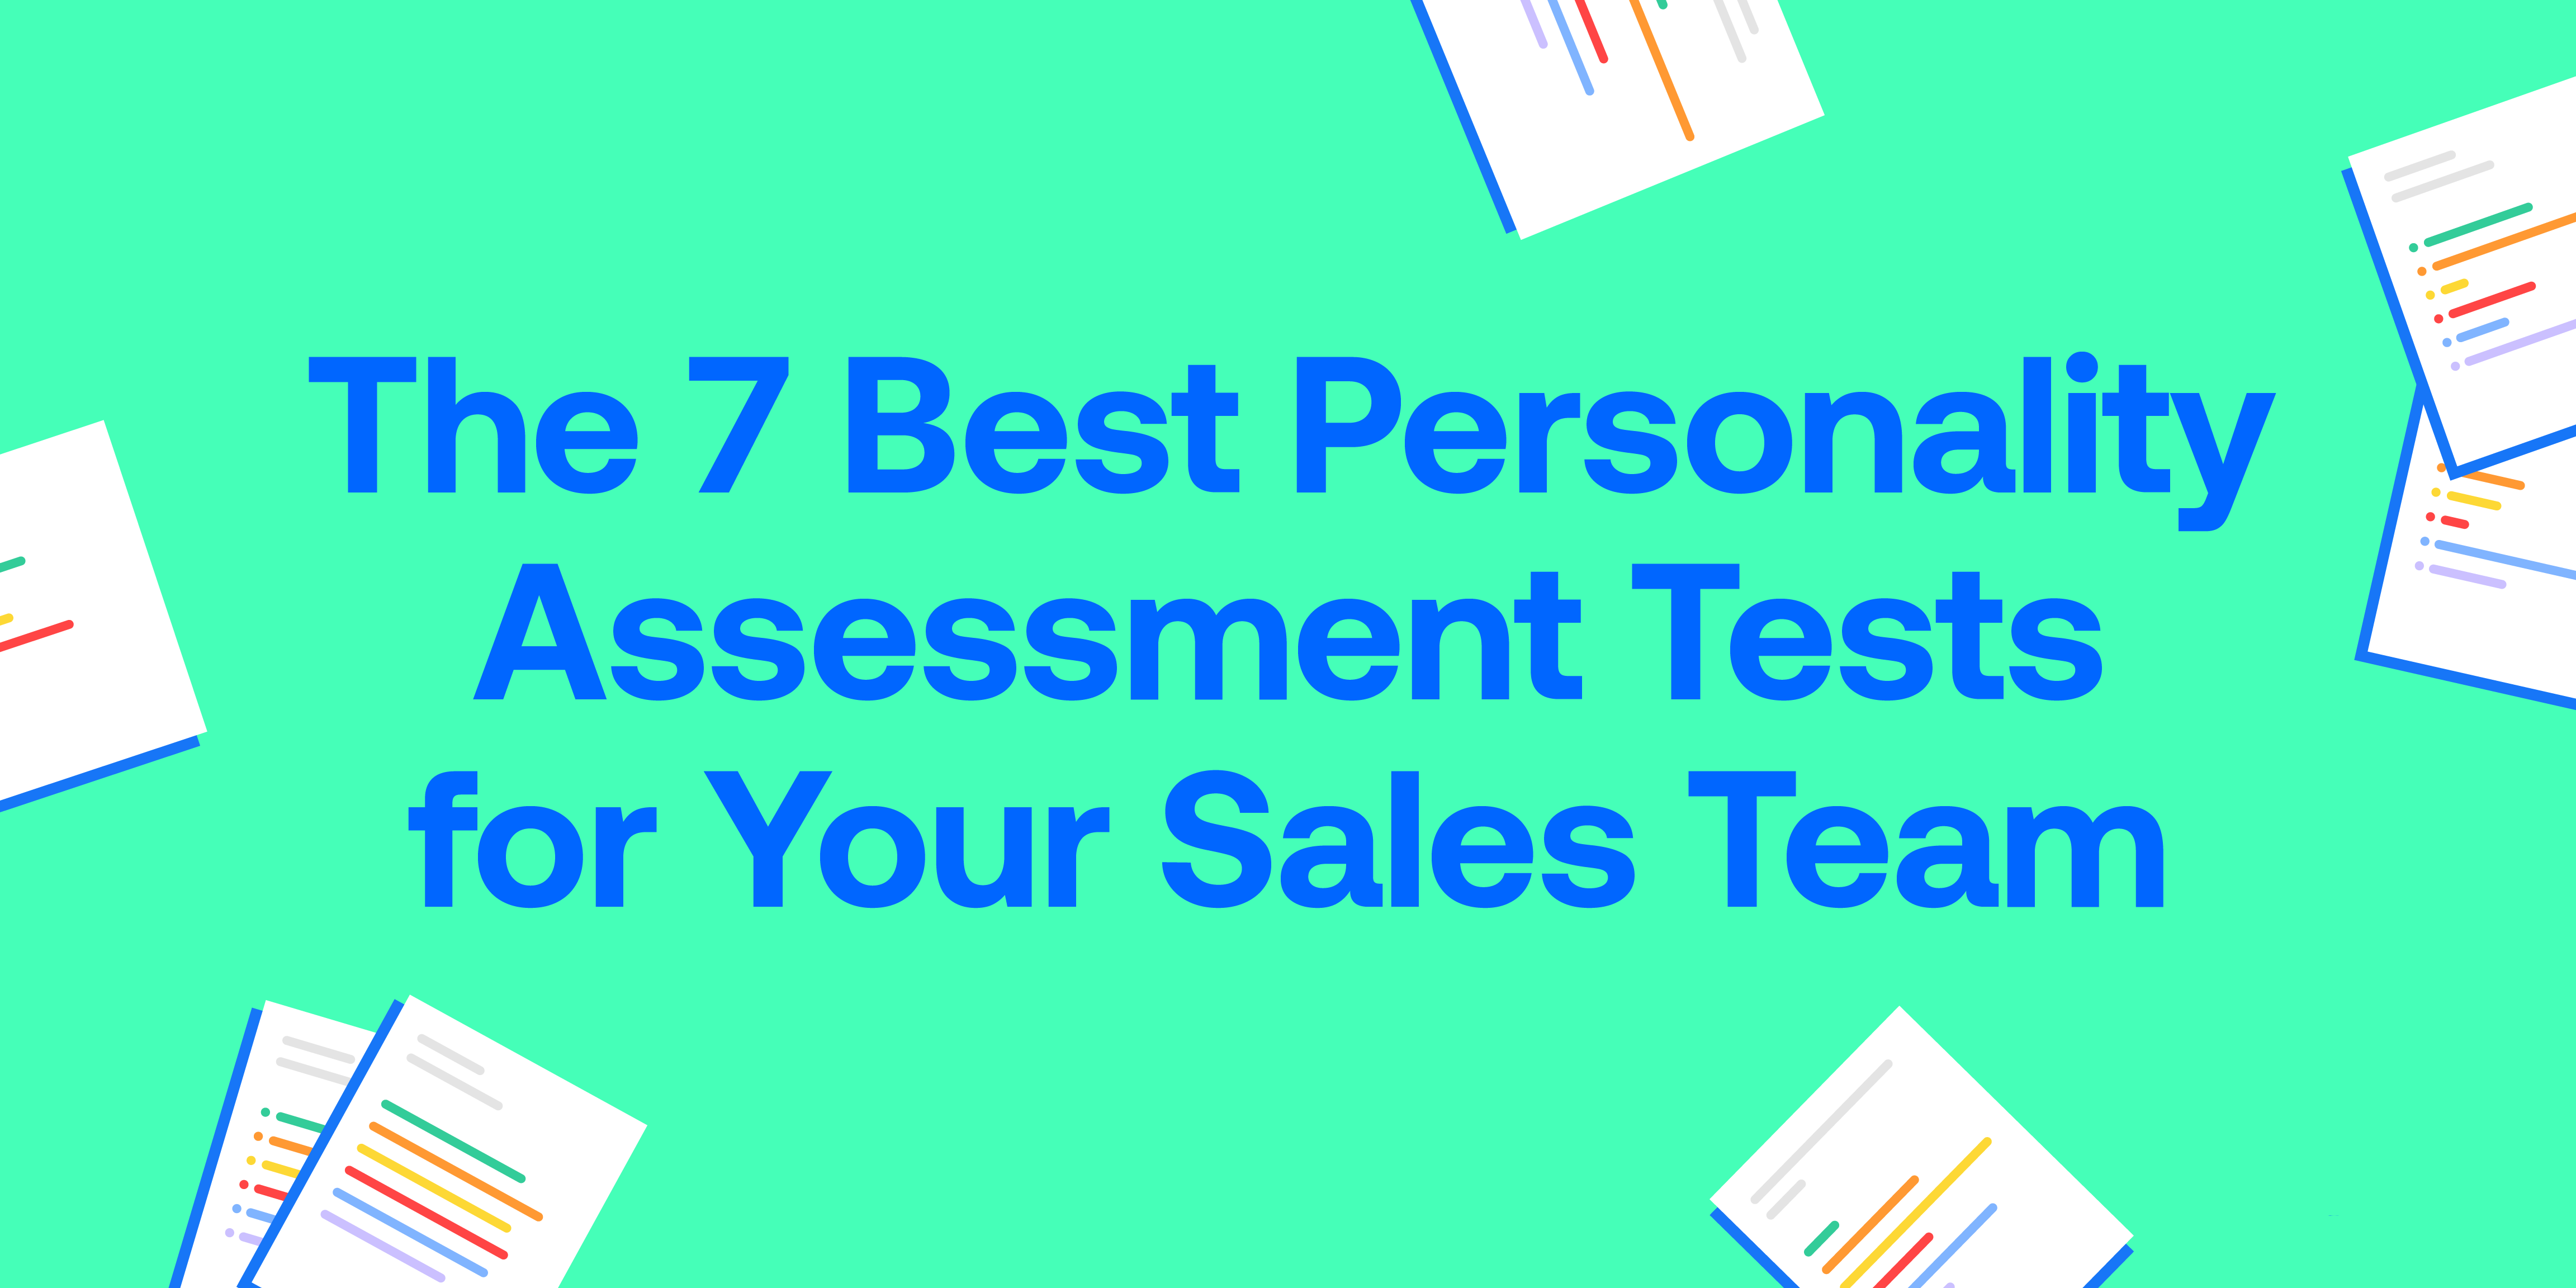 How to assess Product Management Skills — Here are the Top 4 MBTI